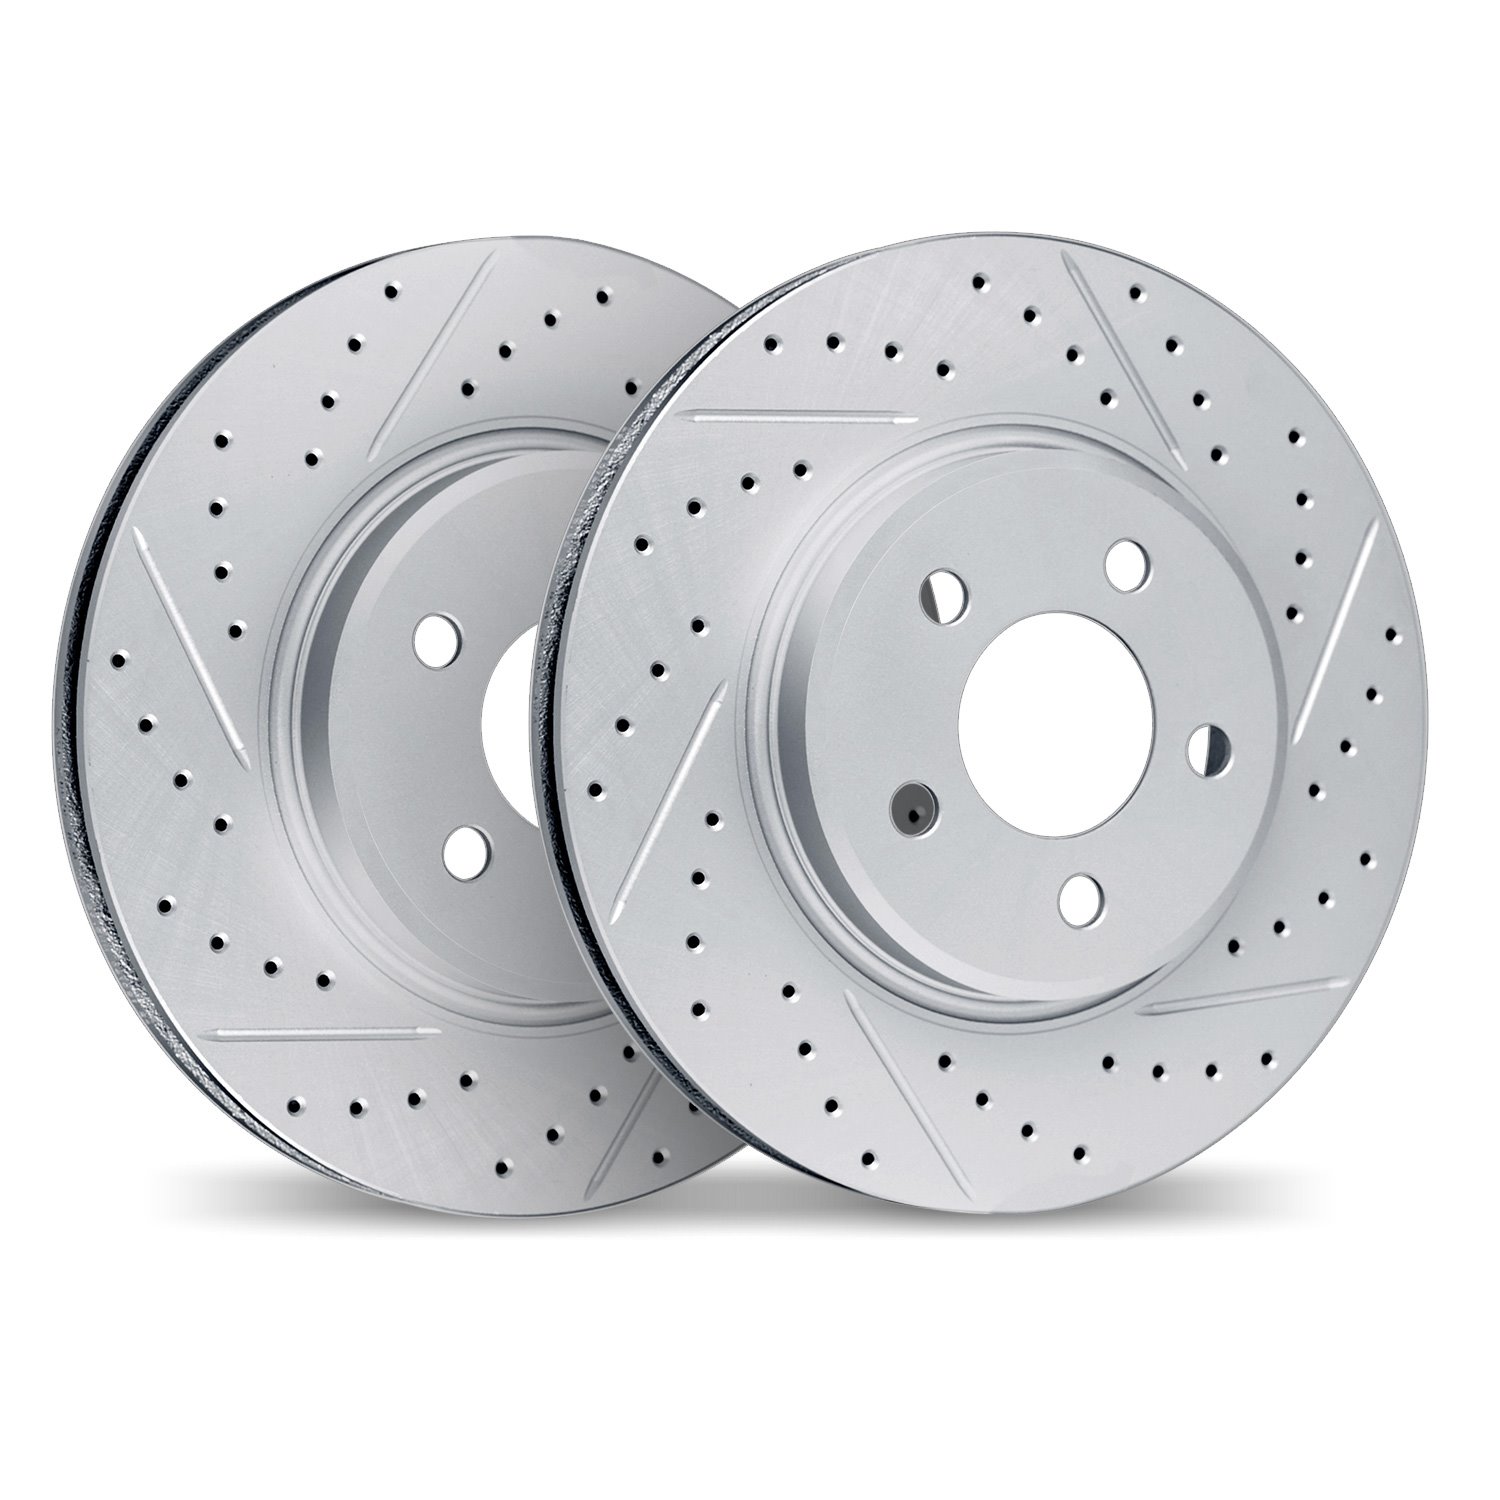 2002-31022 Geoperformance Drilled/Slotted Brake Rotors, Fits Select BMW, Position: Front